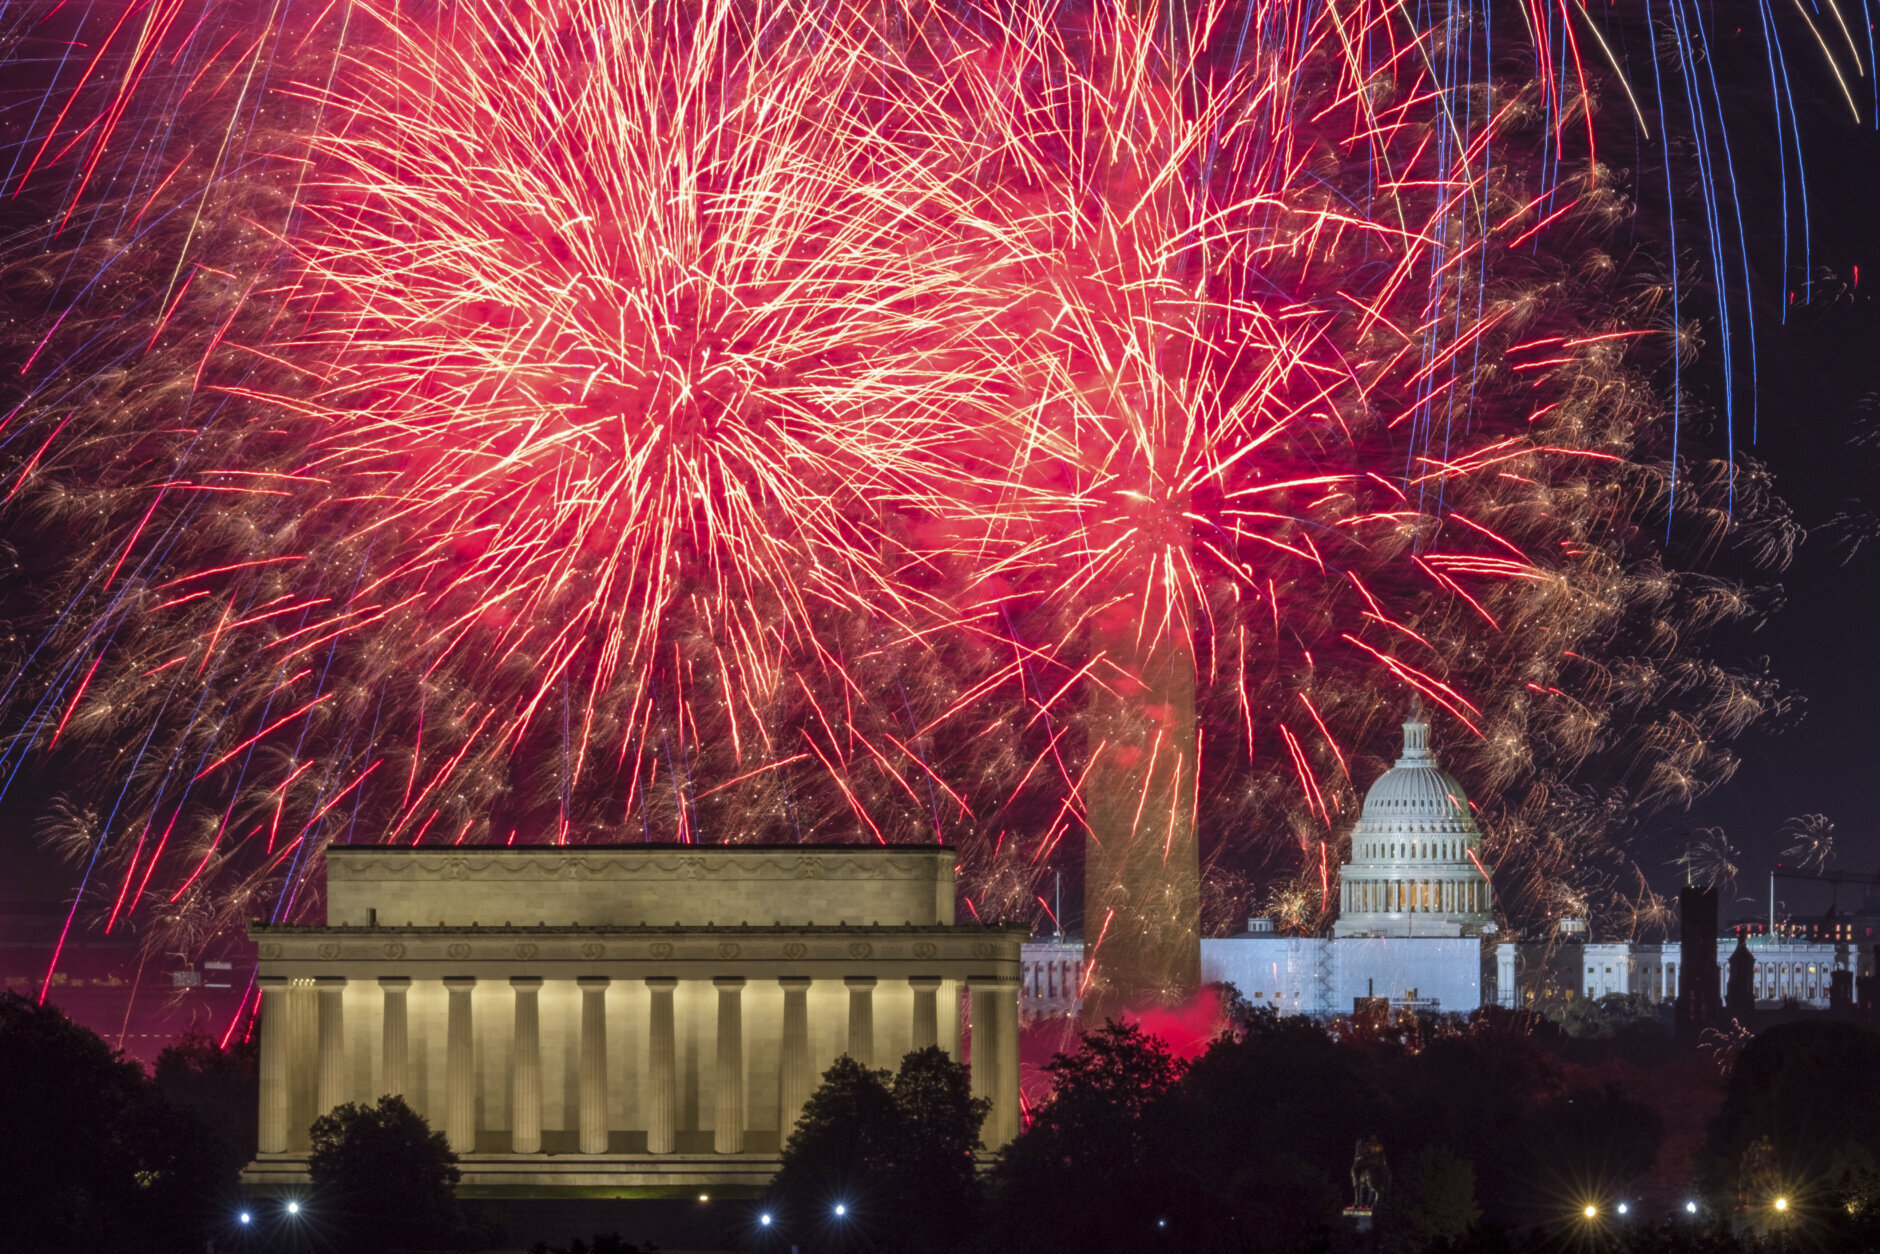 PHOTOS Thousands gather at National Mall for July Fourth fireworks